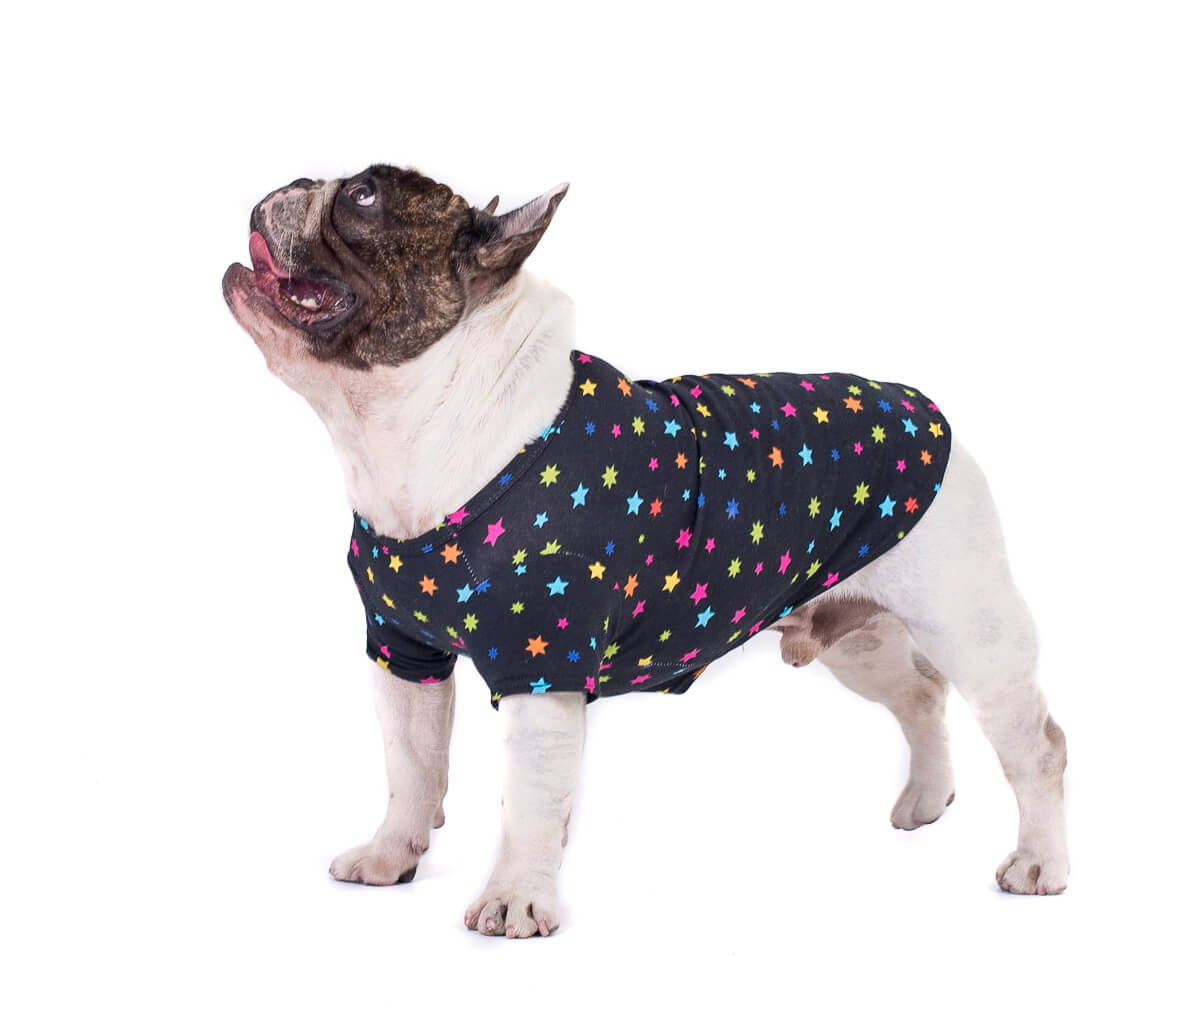 French Bulldog in star gazer dog shirt - Charming French Bulldog standing sideways in a black shirt with bright multi-colored stars - Enhance your Frenchie's style with the star gazer shirt - Shop now for trendy dog shirts and clothing with eye-catching designs.